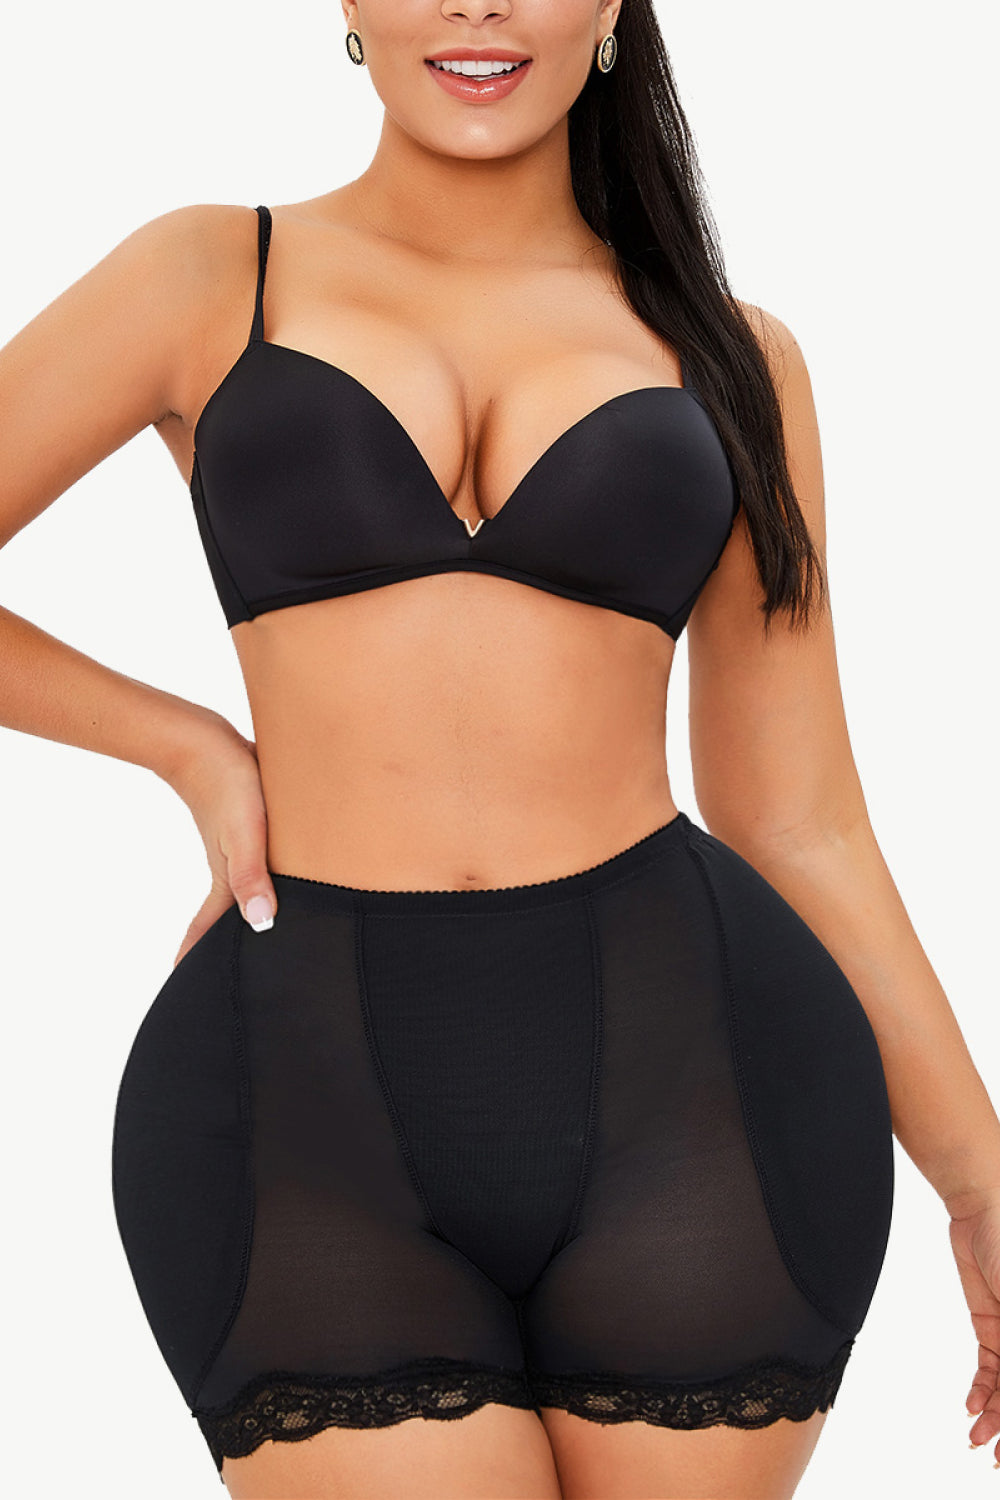 SHAPEWEAR COLLECTION/ Active Wear